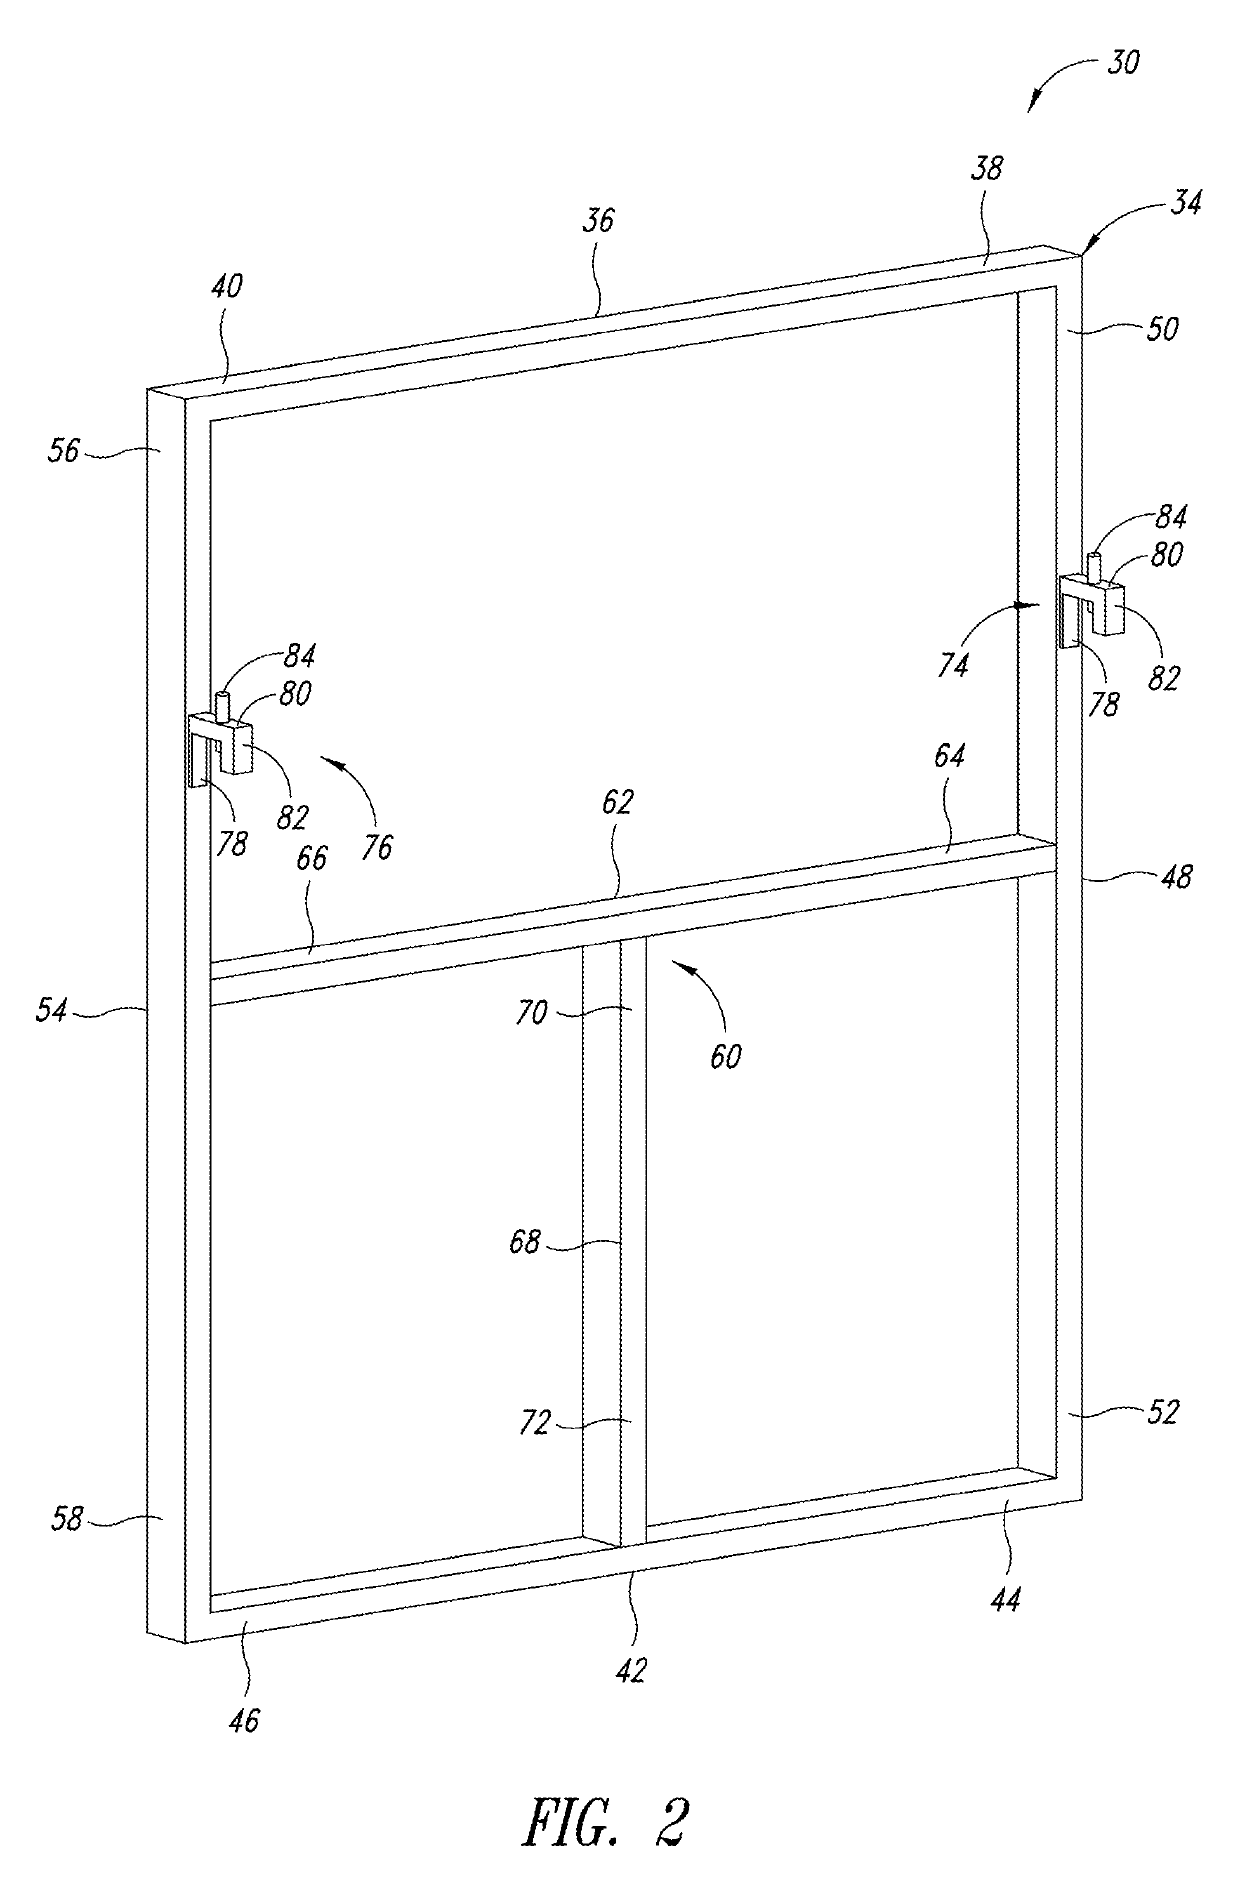 Panel frame assembly, processing, transport, and installation system